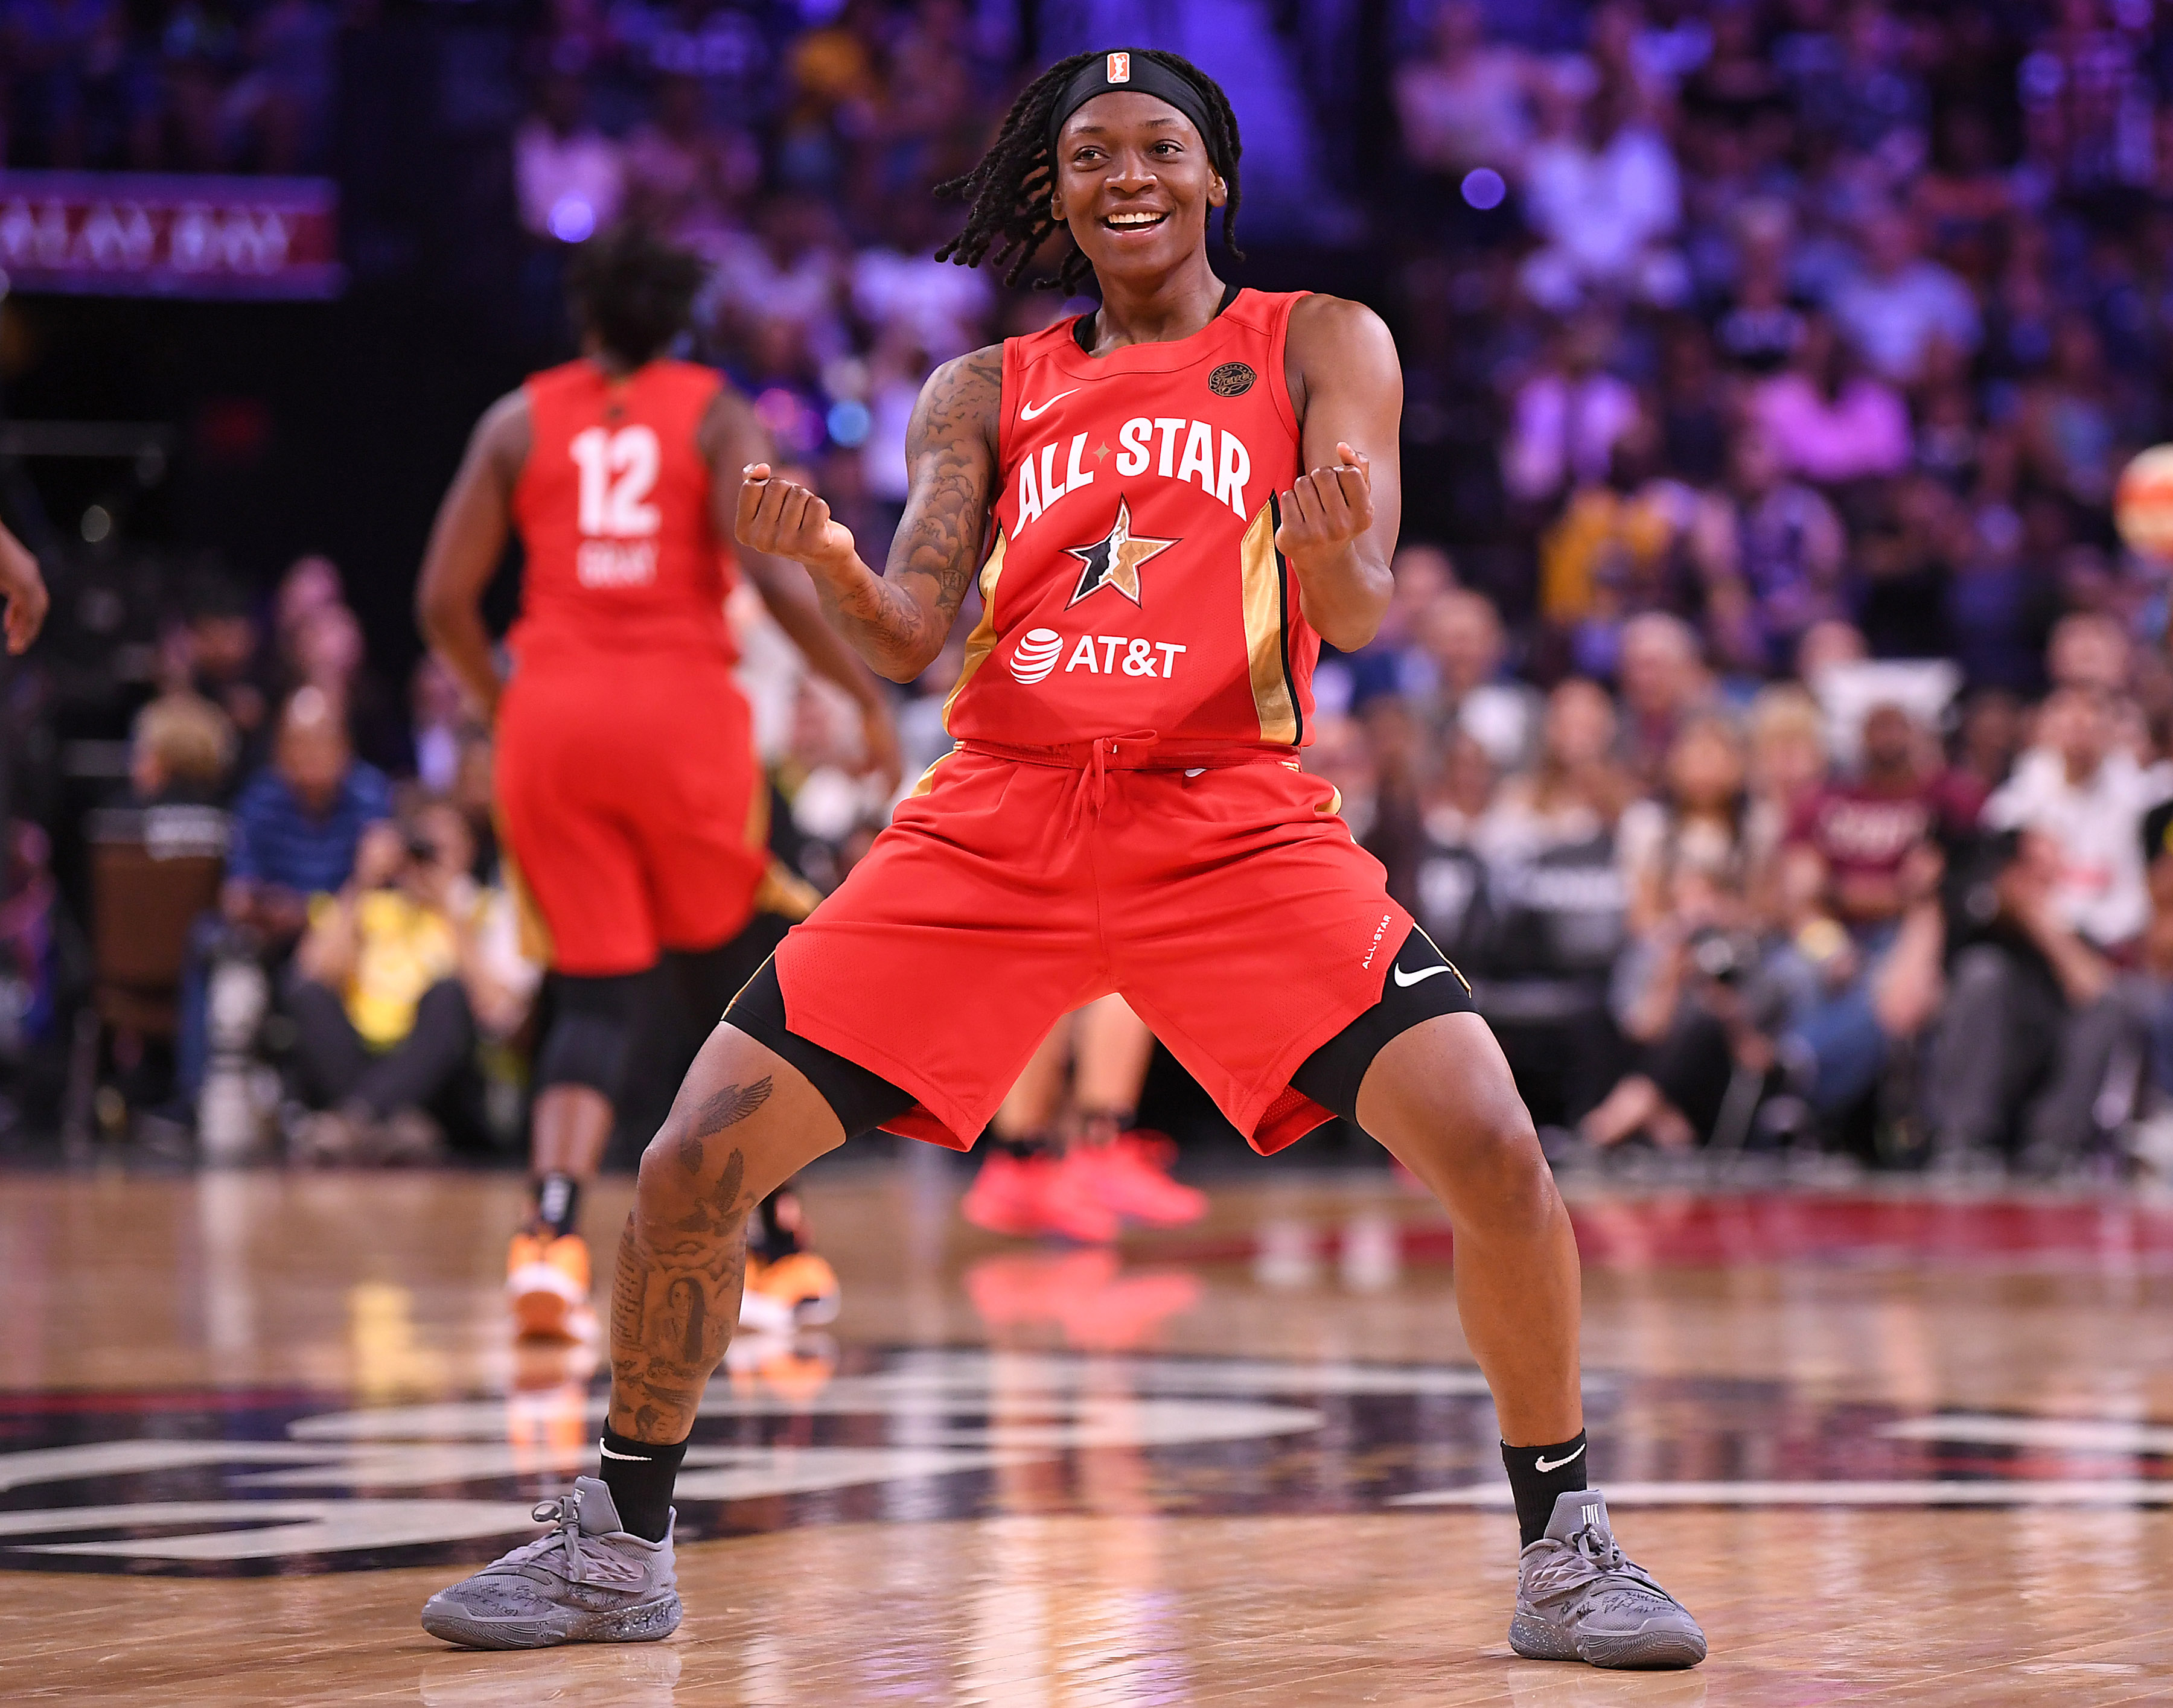 Scripps Sports generates 24% increase in WNBA viewership numbers